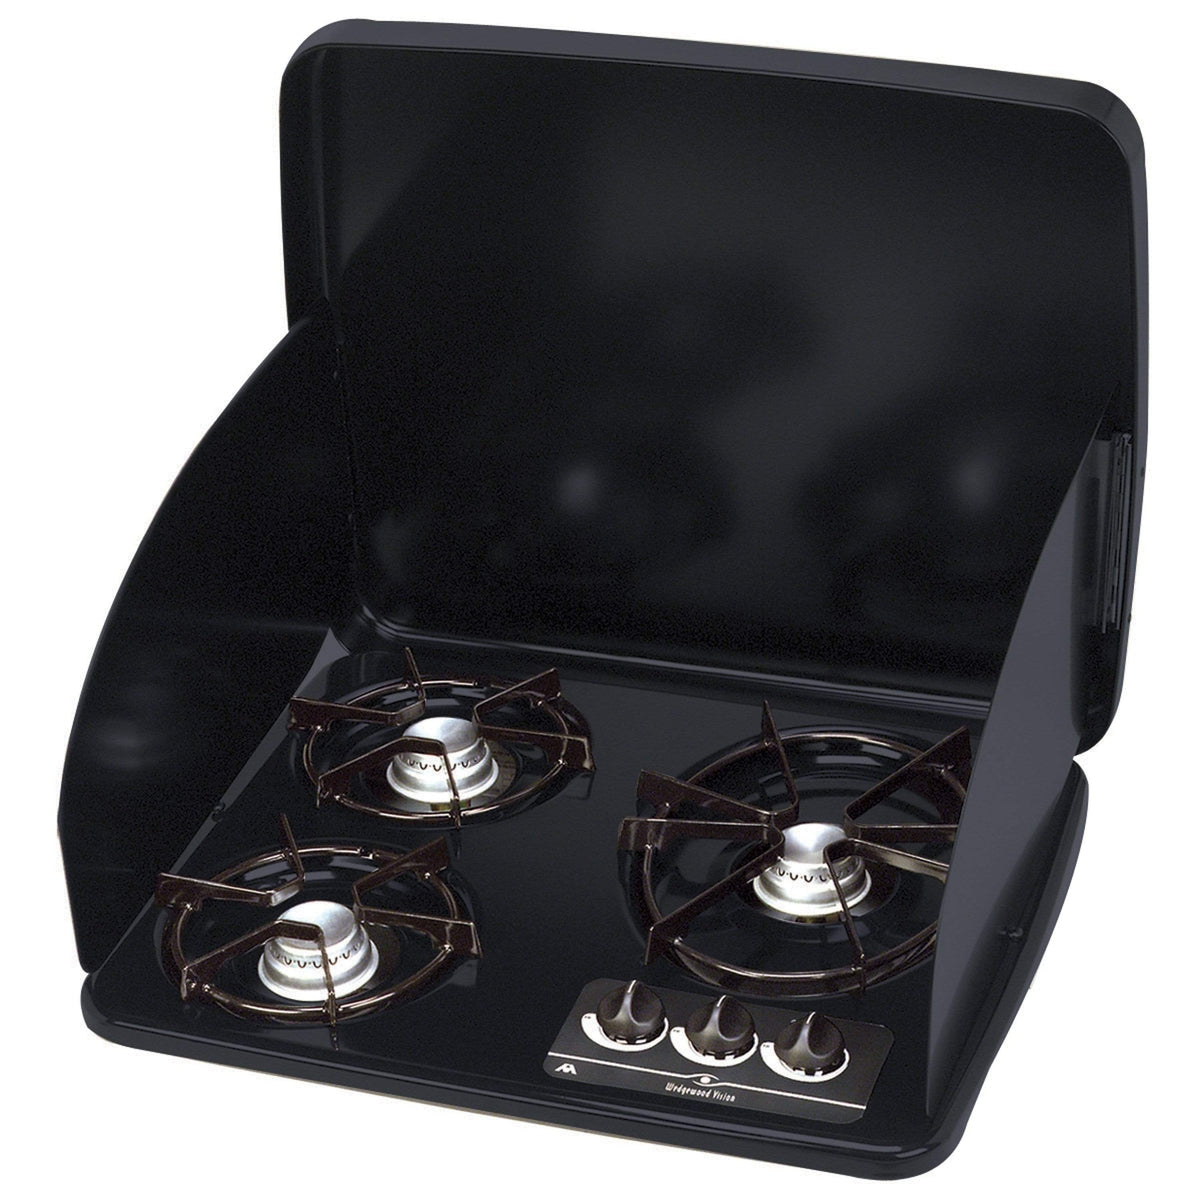 Atwood Mobile Products Qualifies for Free Shipping Atwood 3-Burner Cooktop Cover Black #56460